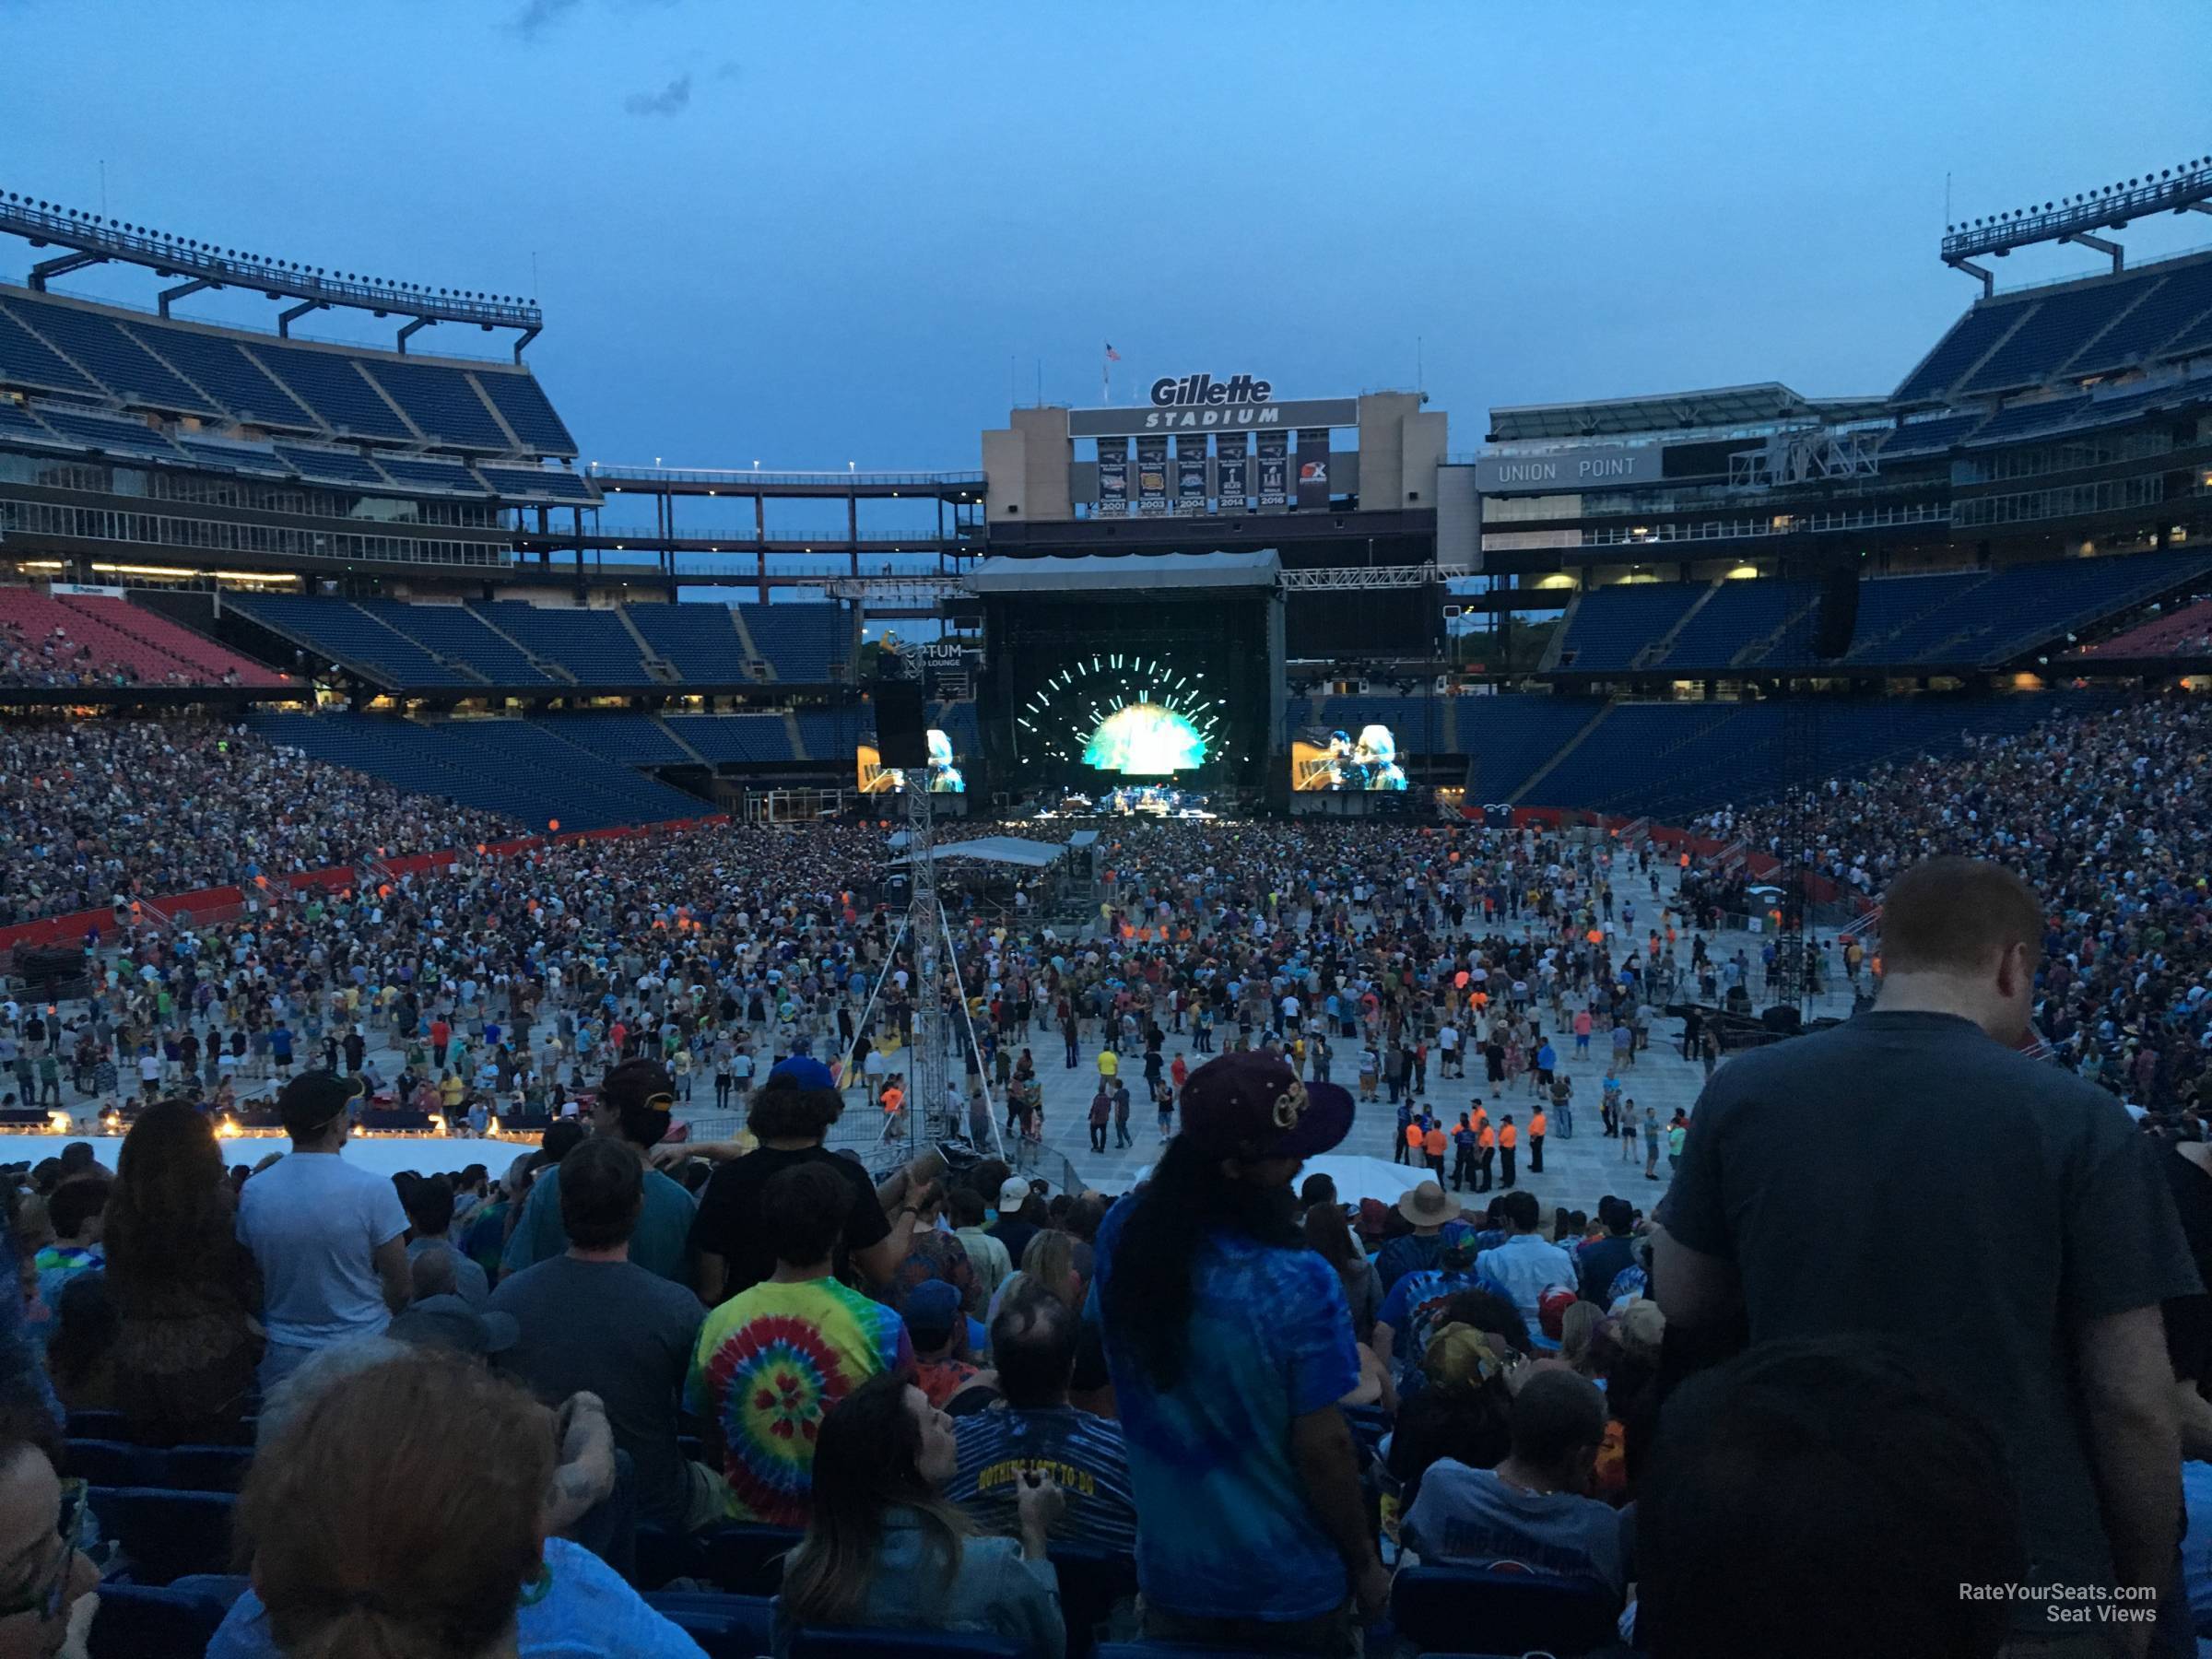 Section 141 at Gillette Stadium for Concerts